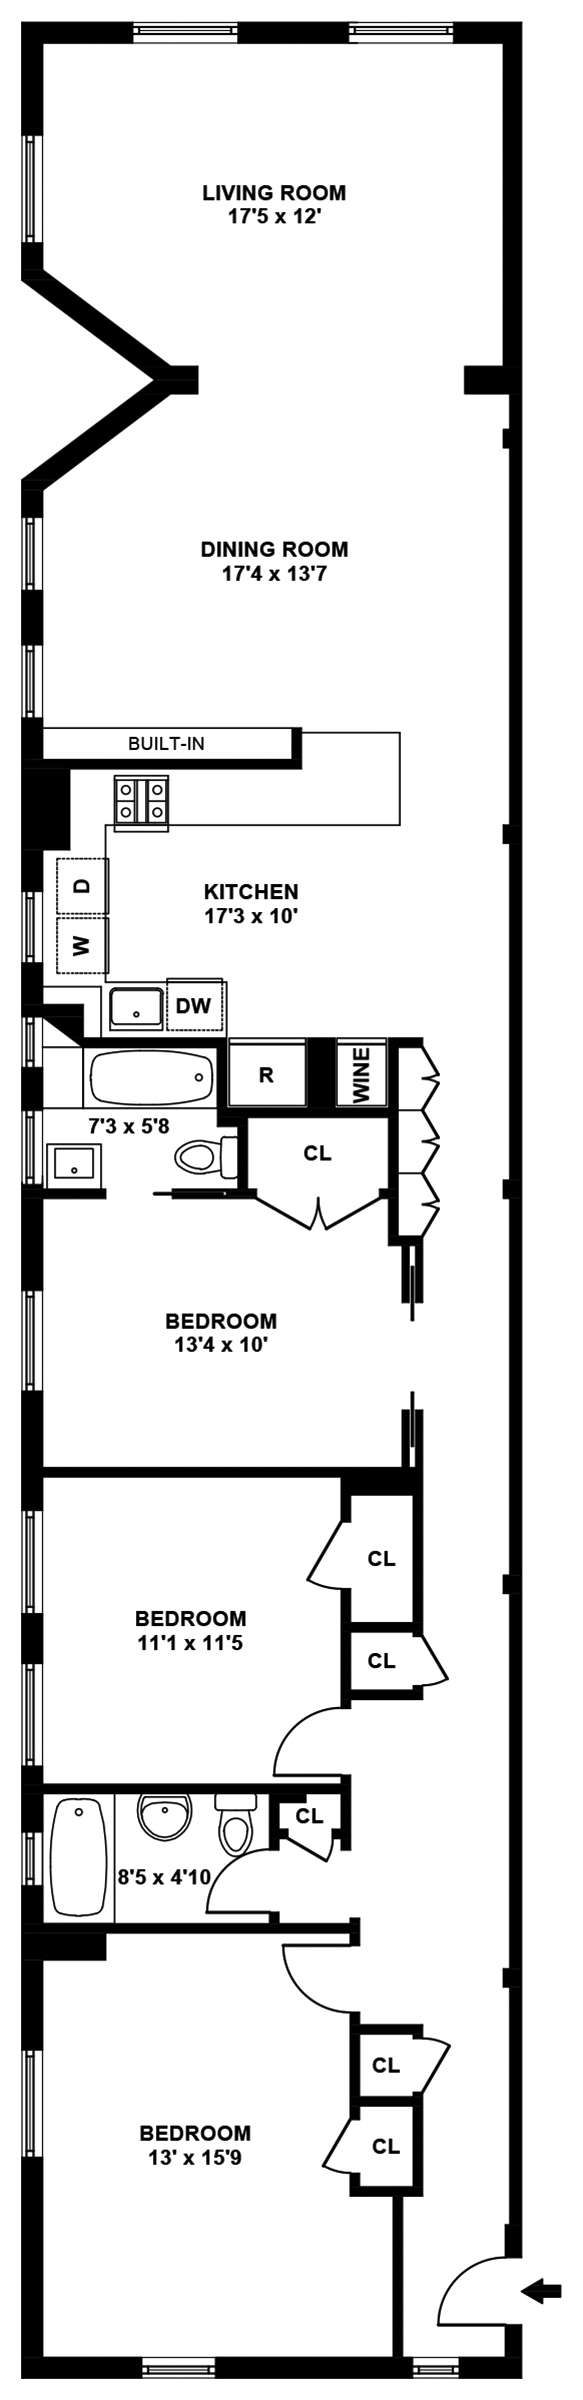 Floorplan for Stunning Clinton Hill 3BR/2Ba With Views